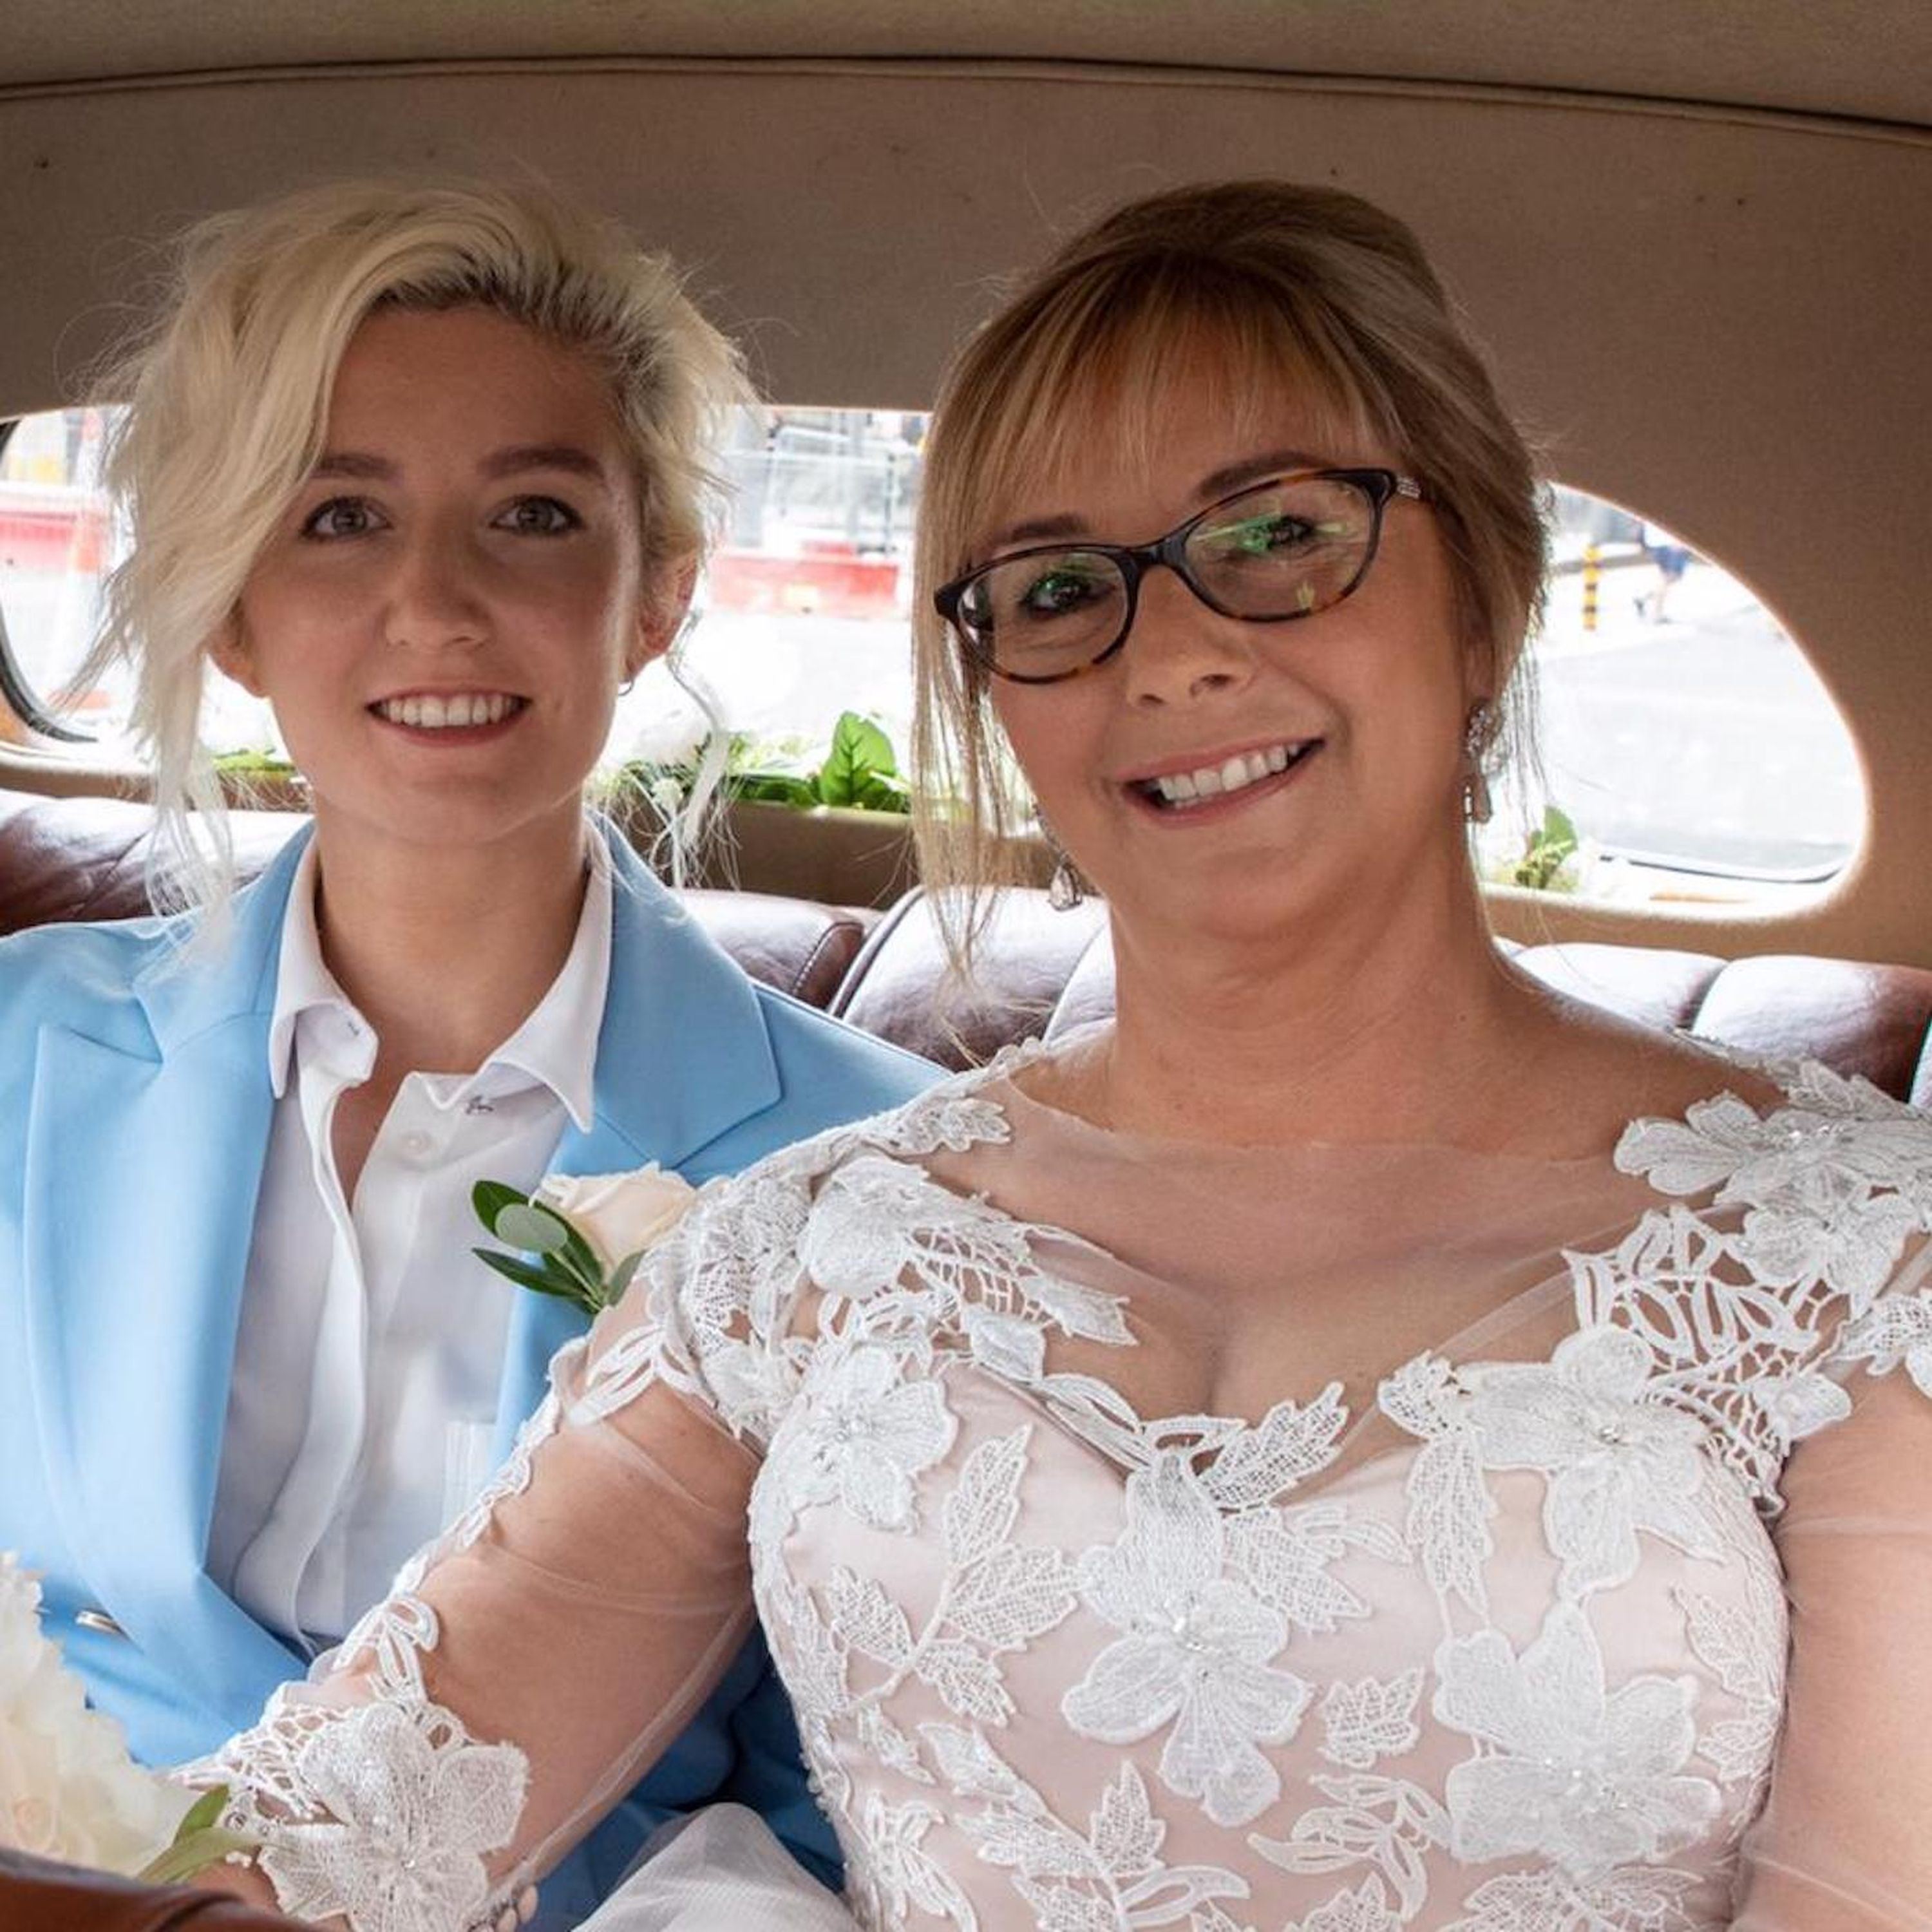 To prepare for my mum’s gay wedding, I talked to her about sexuality for the first time